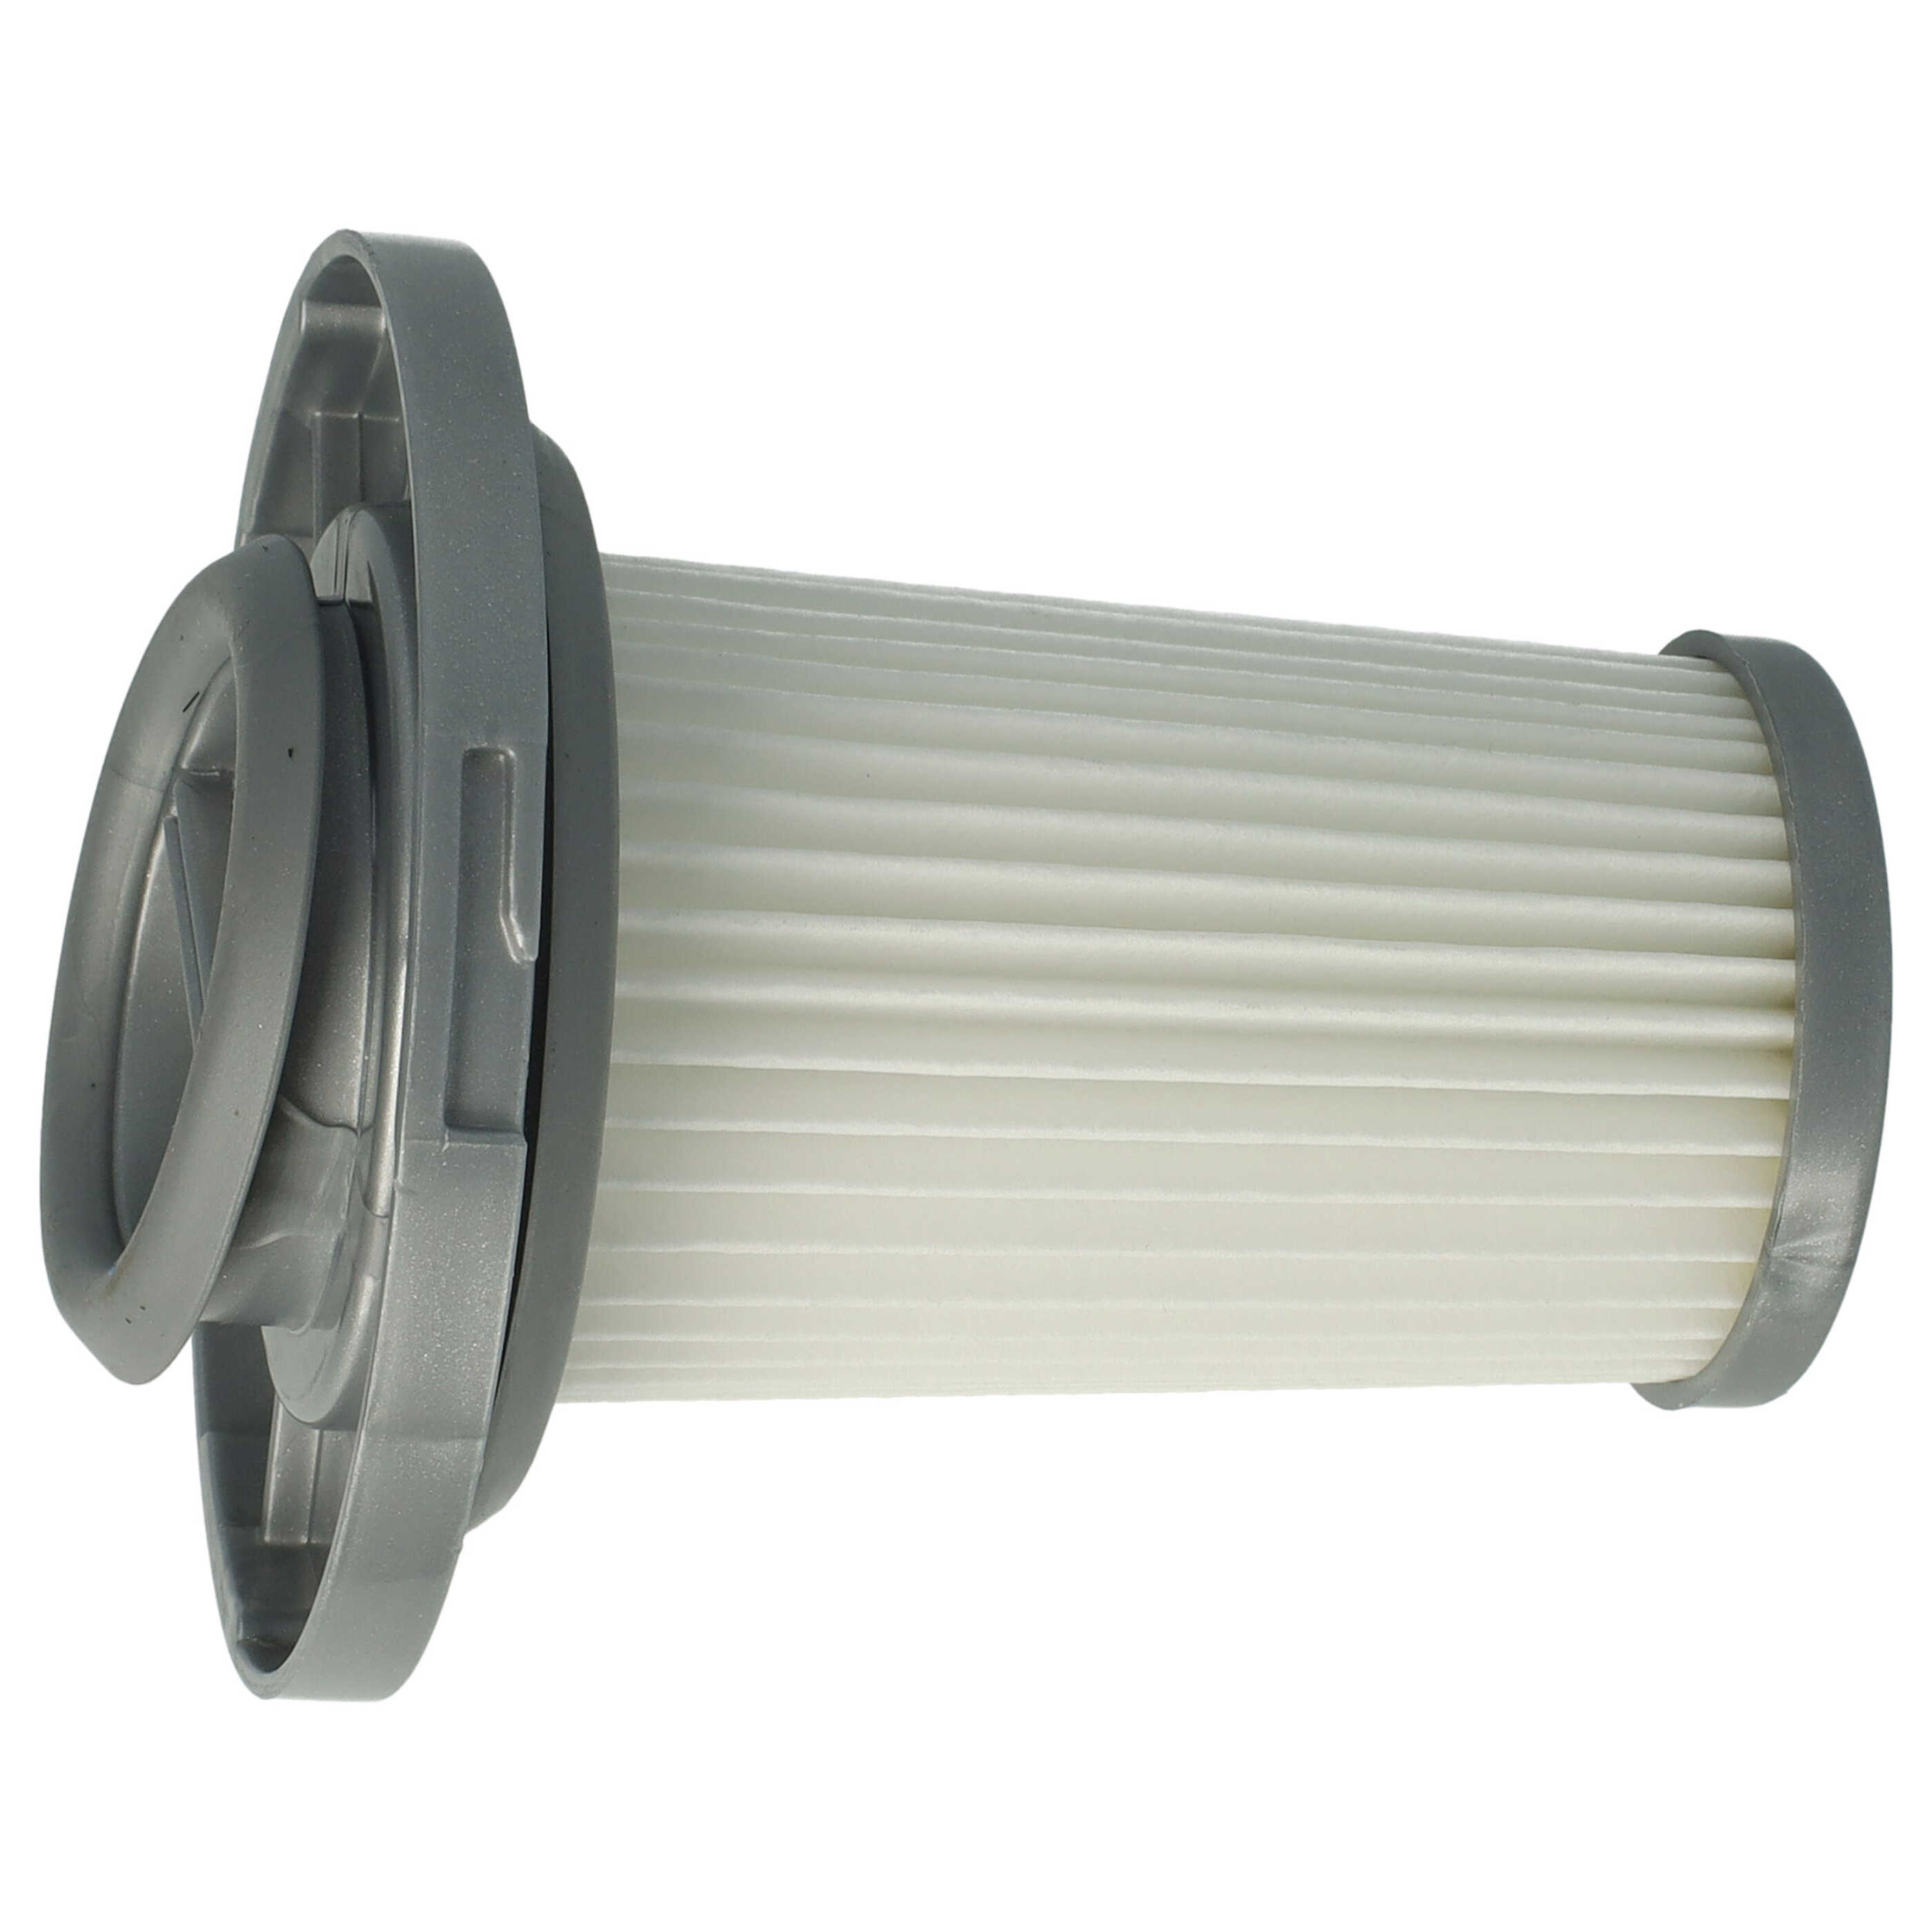 1x cartridge filter replaces Rowenta ZR009005 for Tefal Vacuum Cleaner